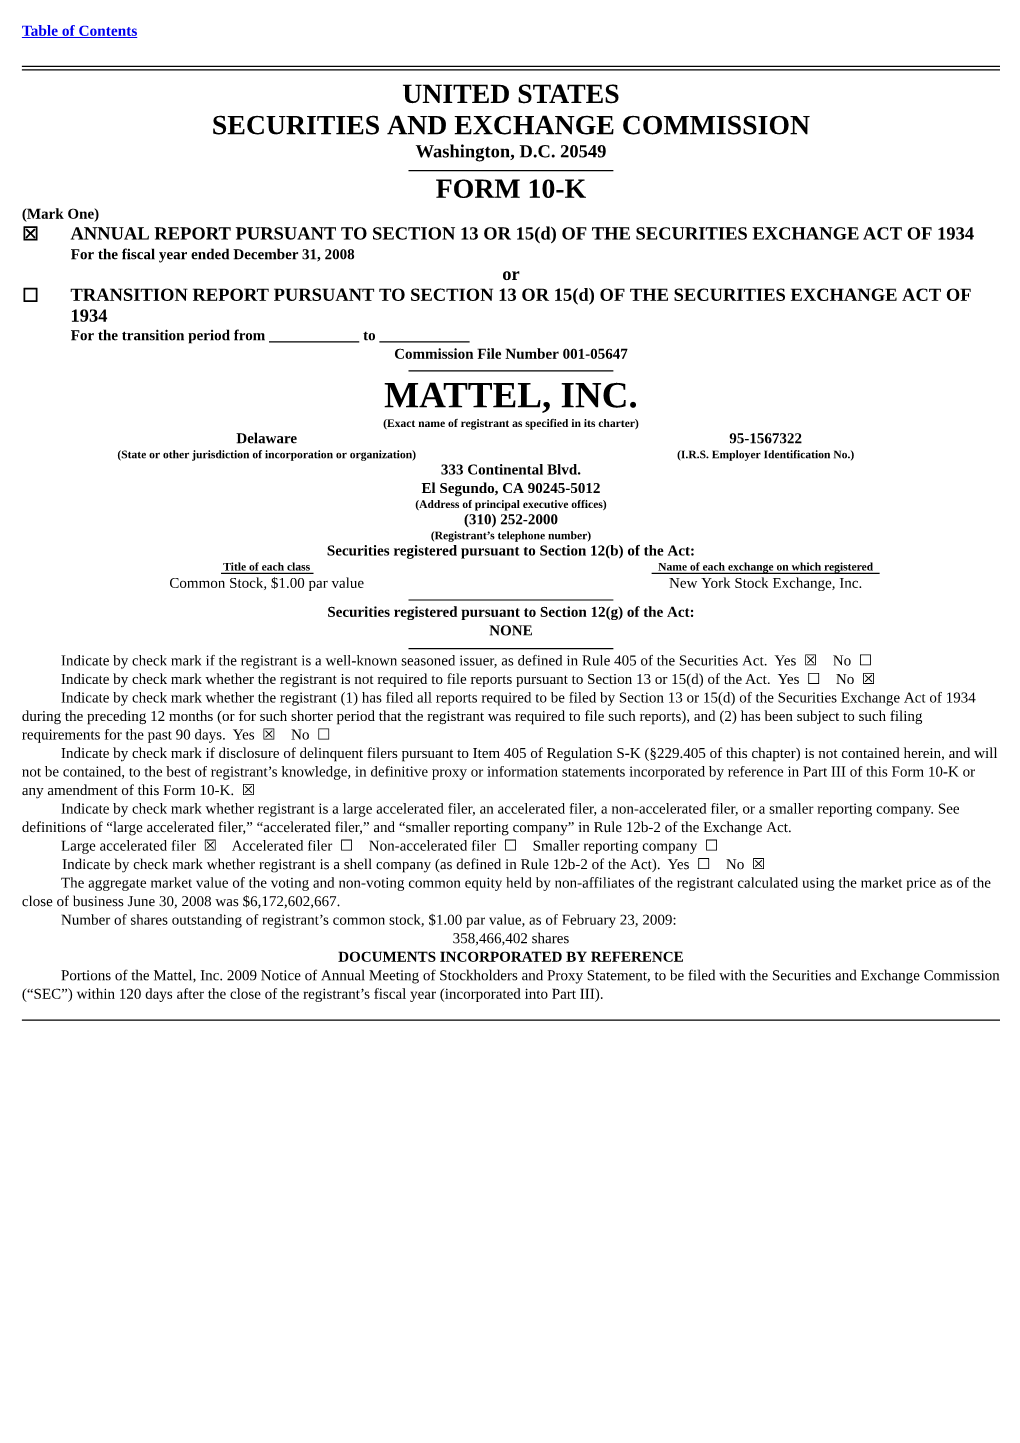 MATTEL, INC. (Exact Name of Registrant As Specified in Its Charter) Delaware 95-1567322 (State Or Other Jurisdiction of Incorporation Or Organization) (I.R.S